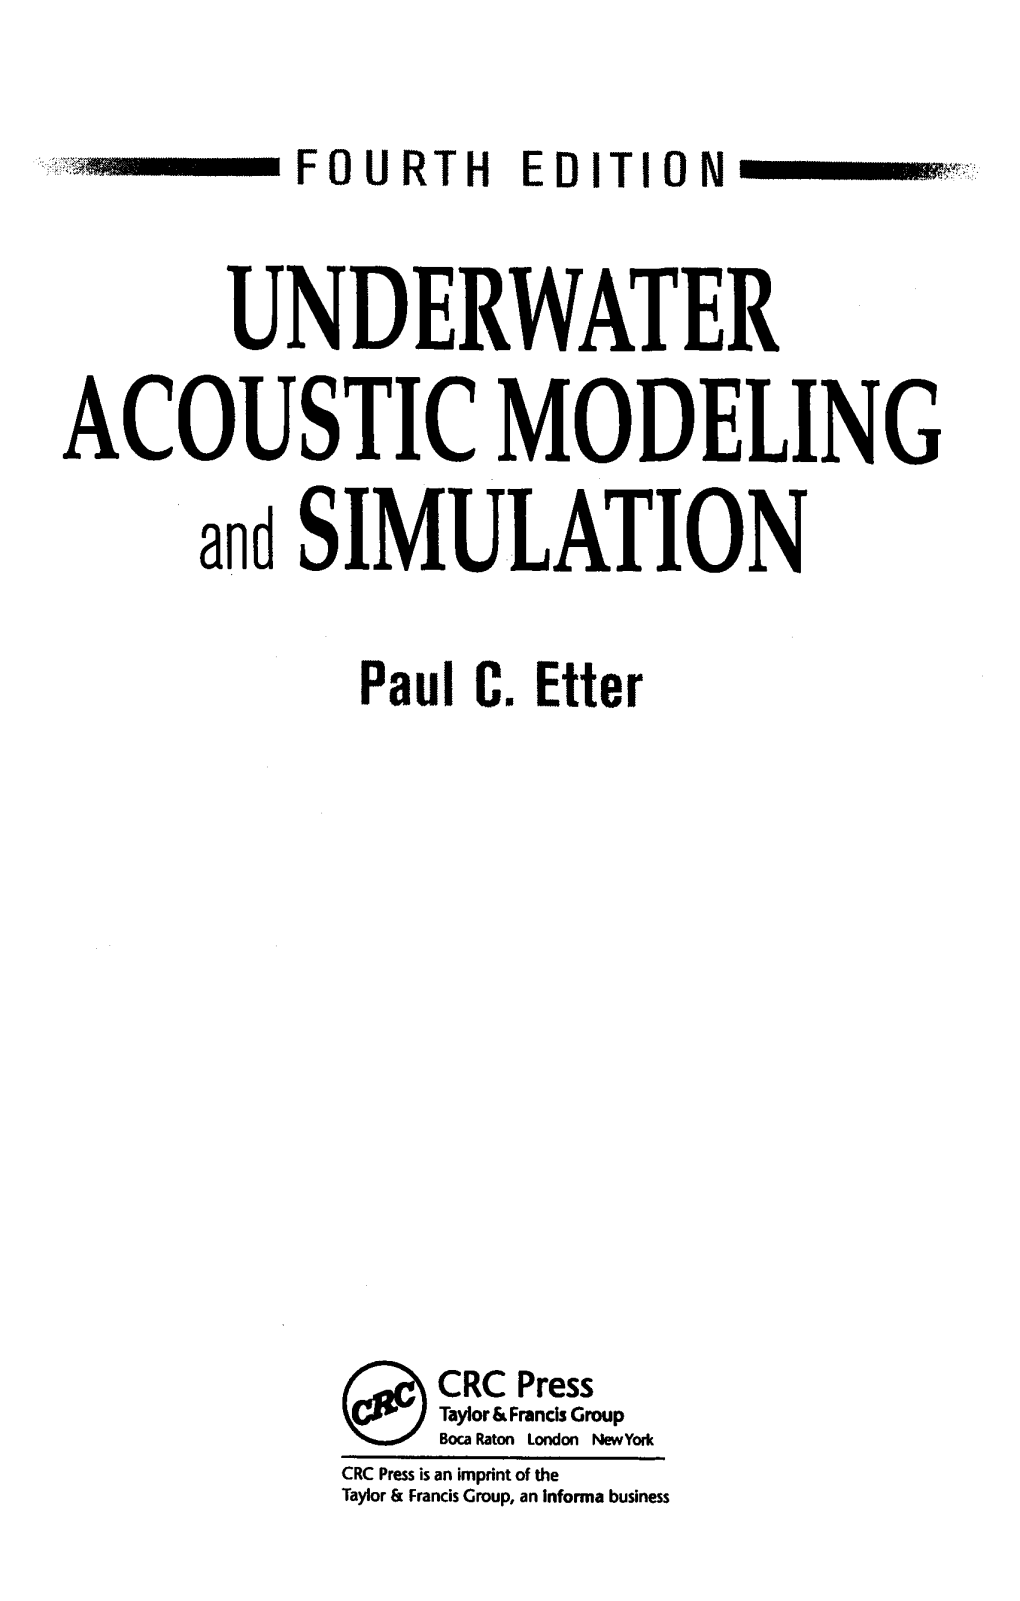 UNDERWATER ACOUSTIC MODELING and SIMULATION